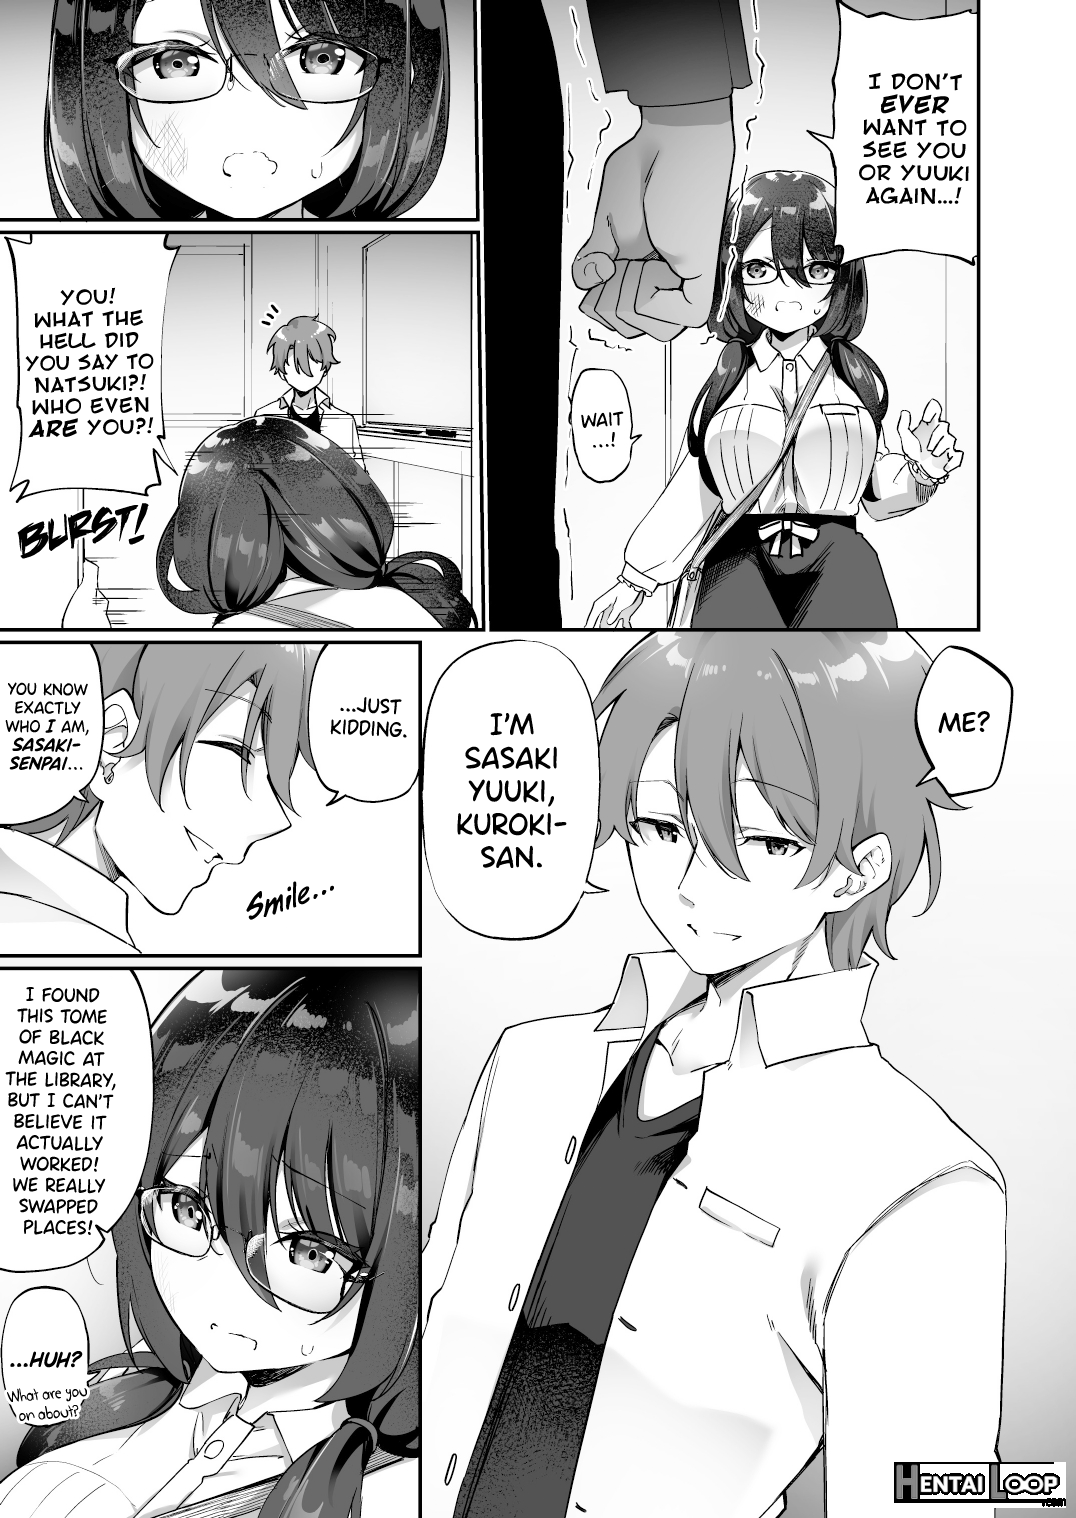 My Voluptuous Yandere Kouhai Who Gets Turned On Just By Hearing My Voice Switched Bodies With Me! page 8